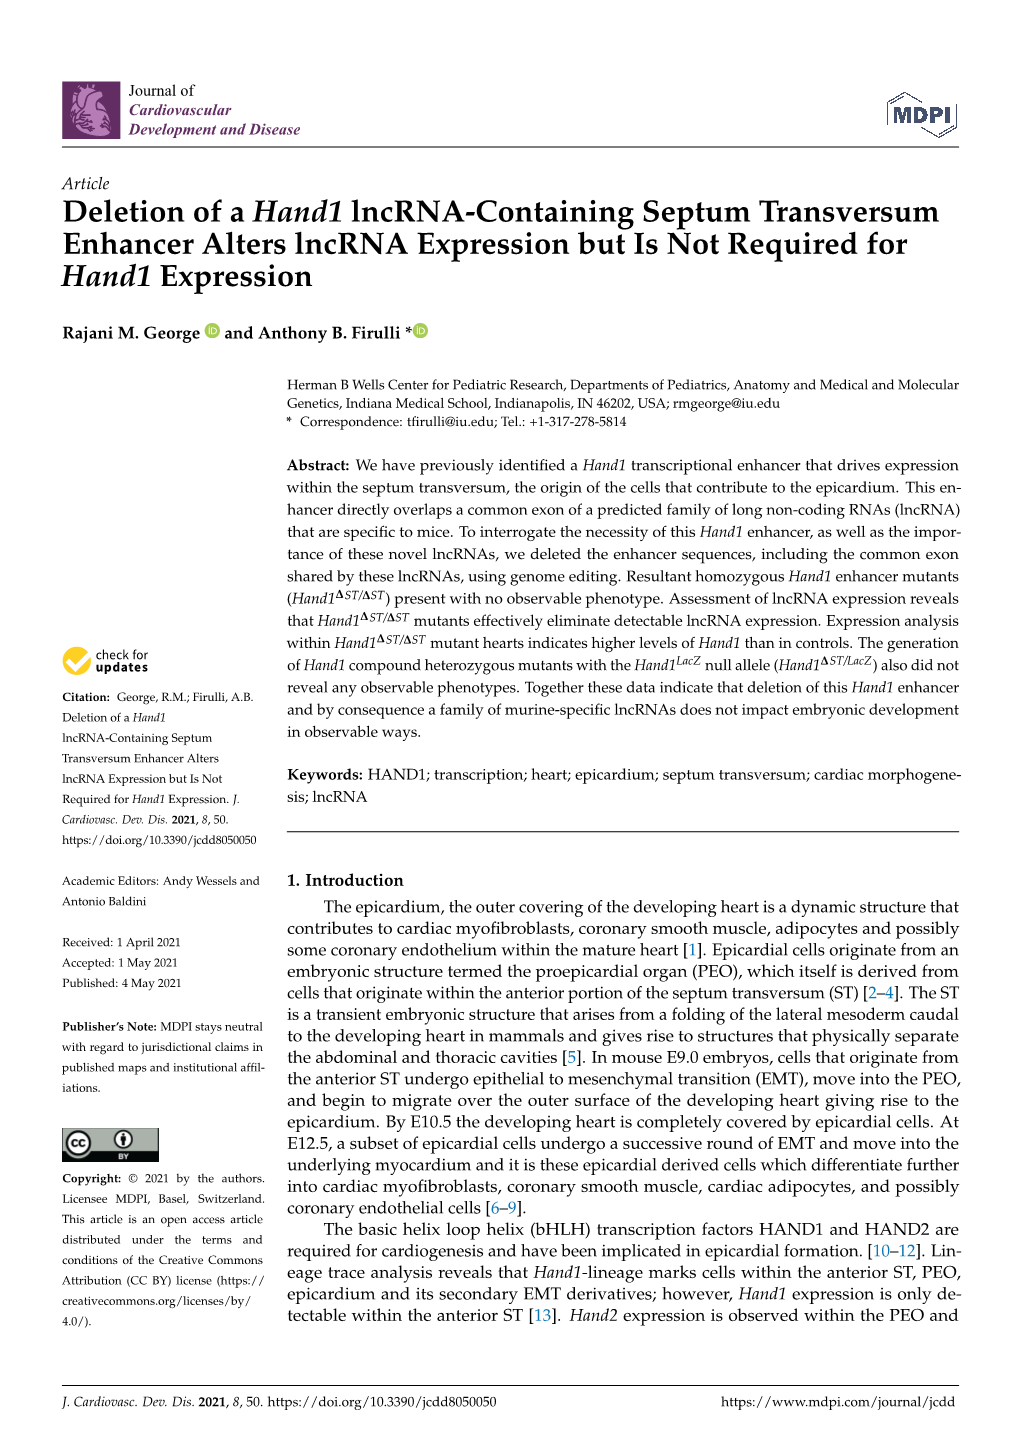 Deletion of a Hand1 Lncrna-Containing Septum Transversum Enhancer Alters Lncrna Expression but Is Not Required for Hand1 Expression